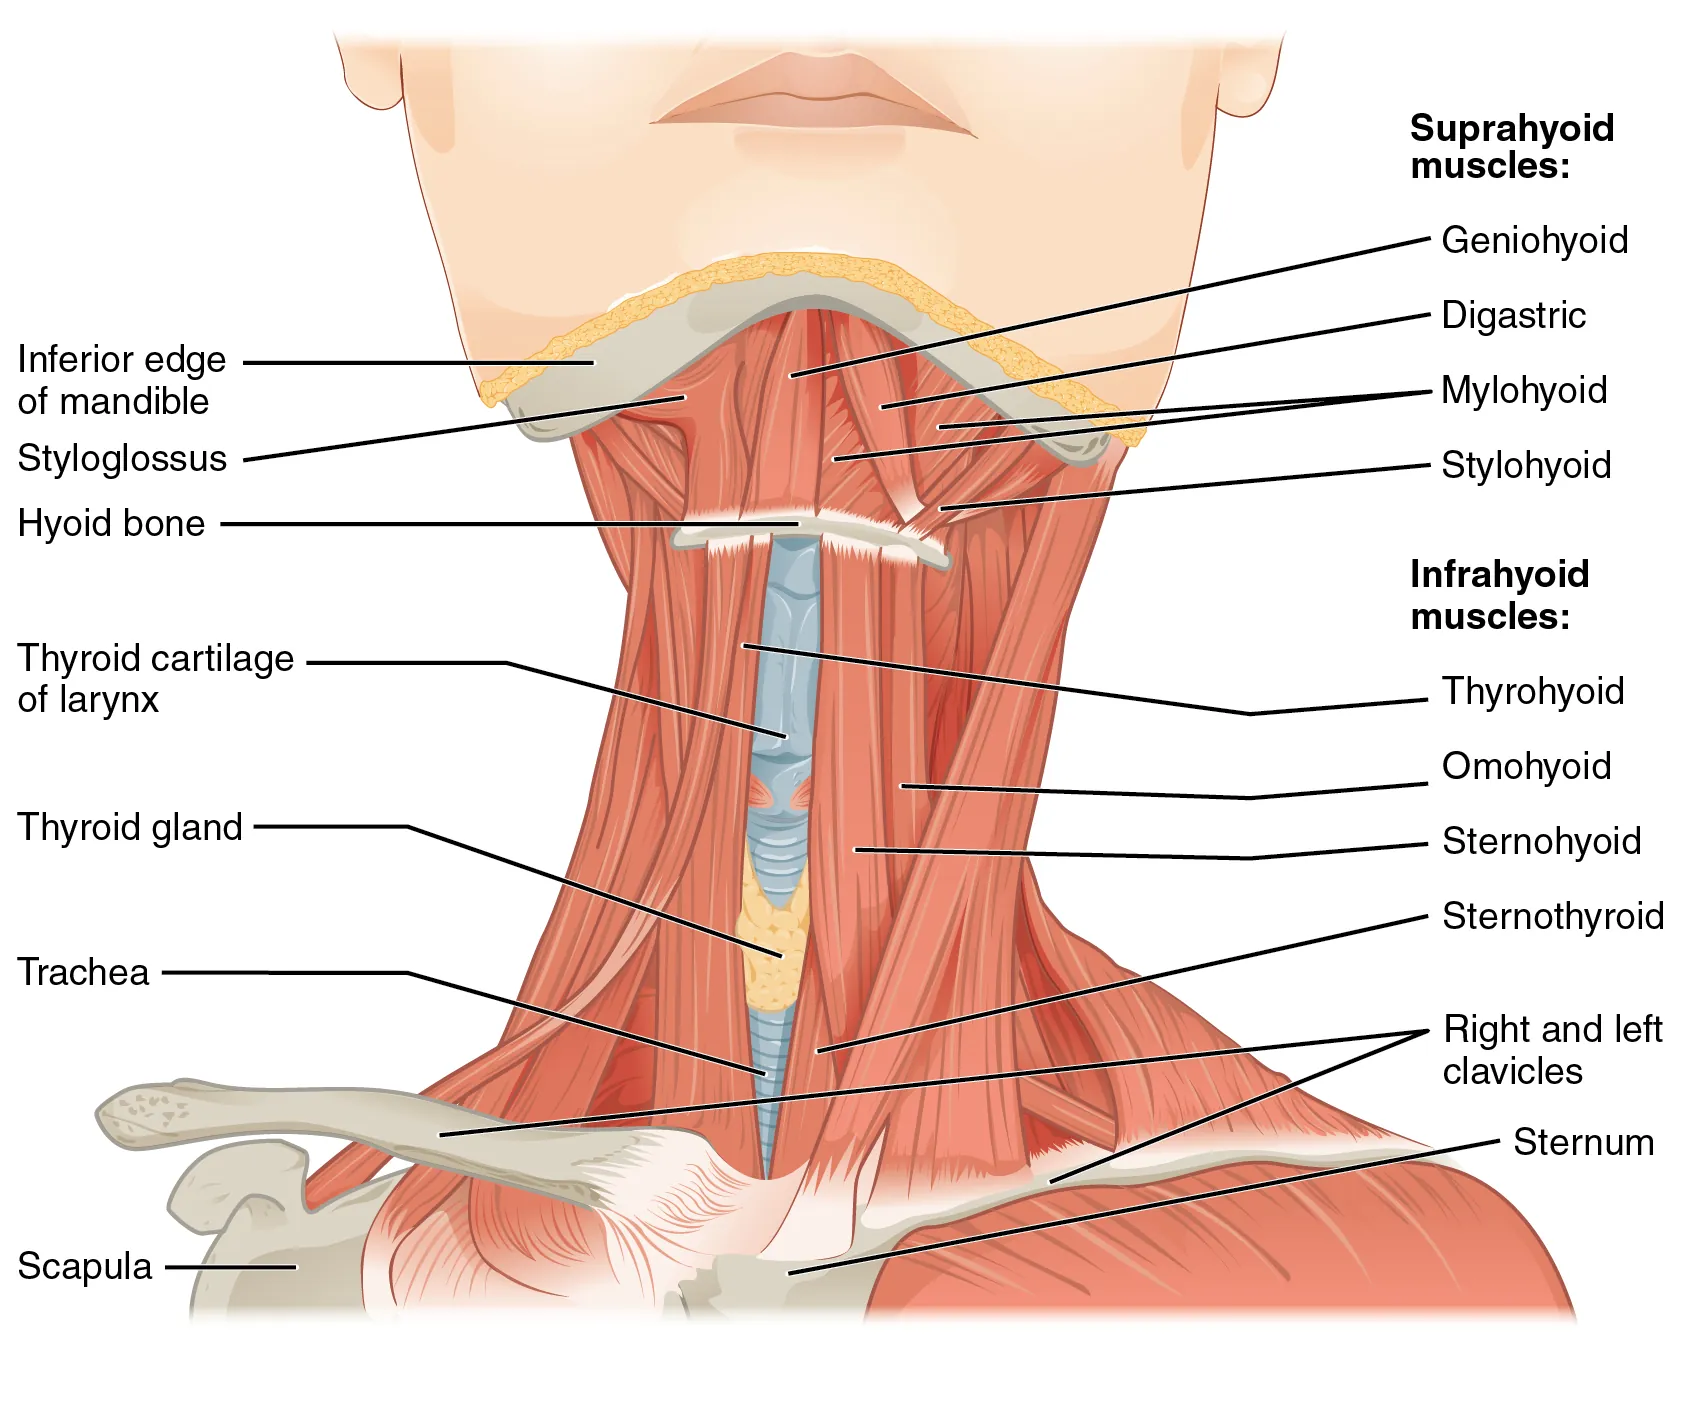 This figure shows the front view of a person’s neck with the major muscle groups labeled.